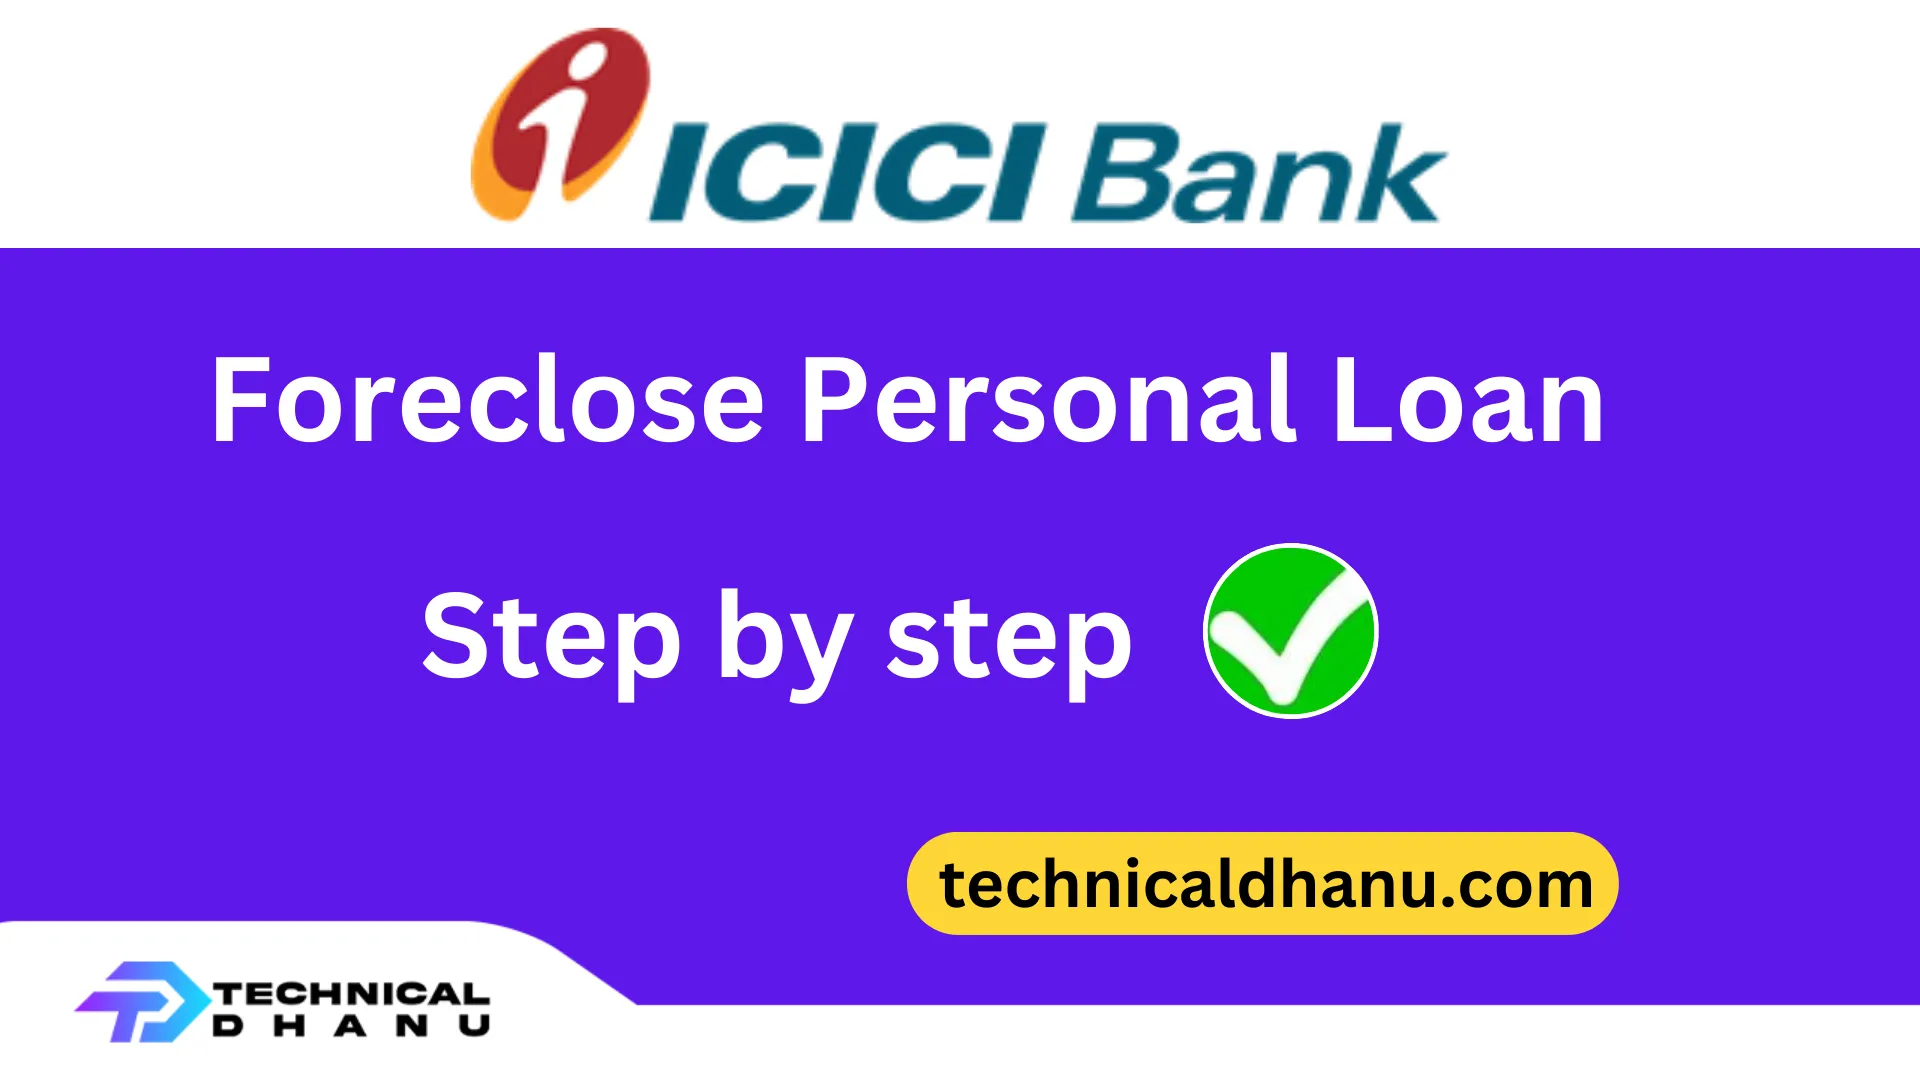 How to Foreclose ICICI Personal Loan